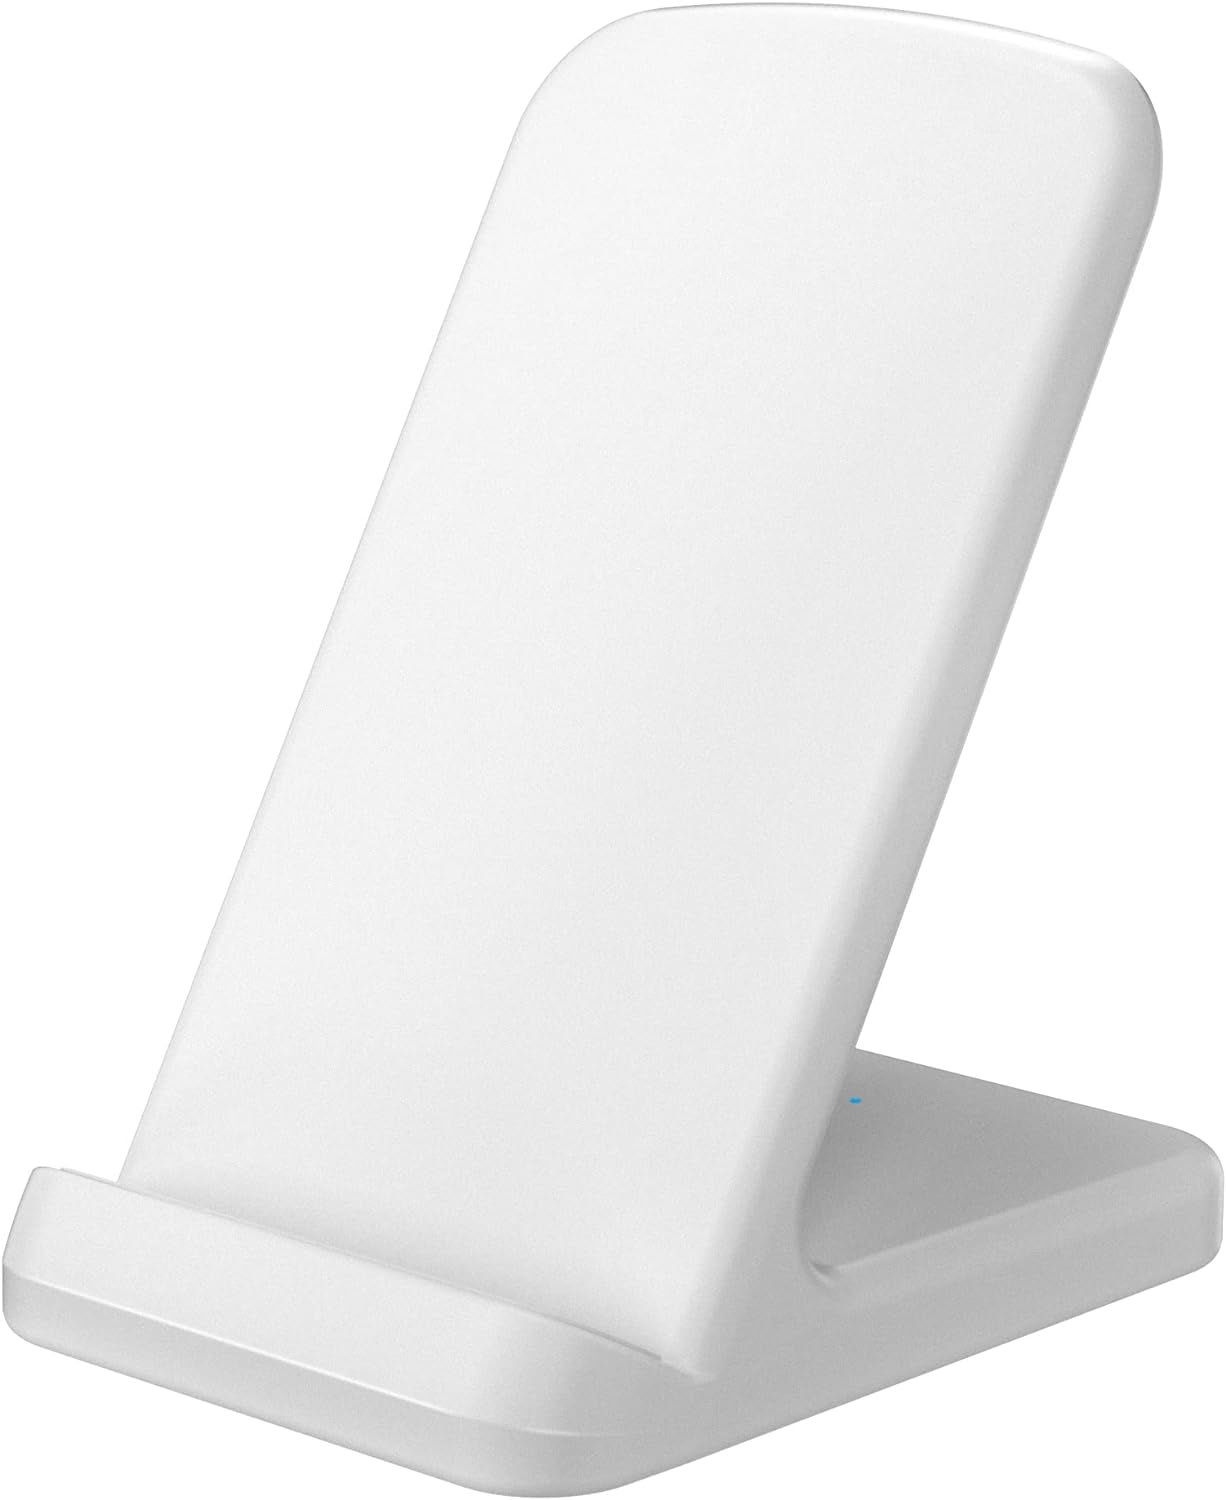 Wireless Charger,  Wireless Charging Stand for Iphone 15/14/13/12/11/XS Max/Xr/X/8 Plus, Wireless Charger Stand Dock Phone Mobile Charger for Samsung Galaxy S23 S22 S21 Note 20(No AC Adapter)